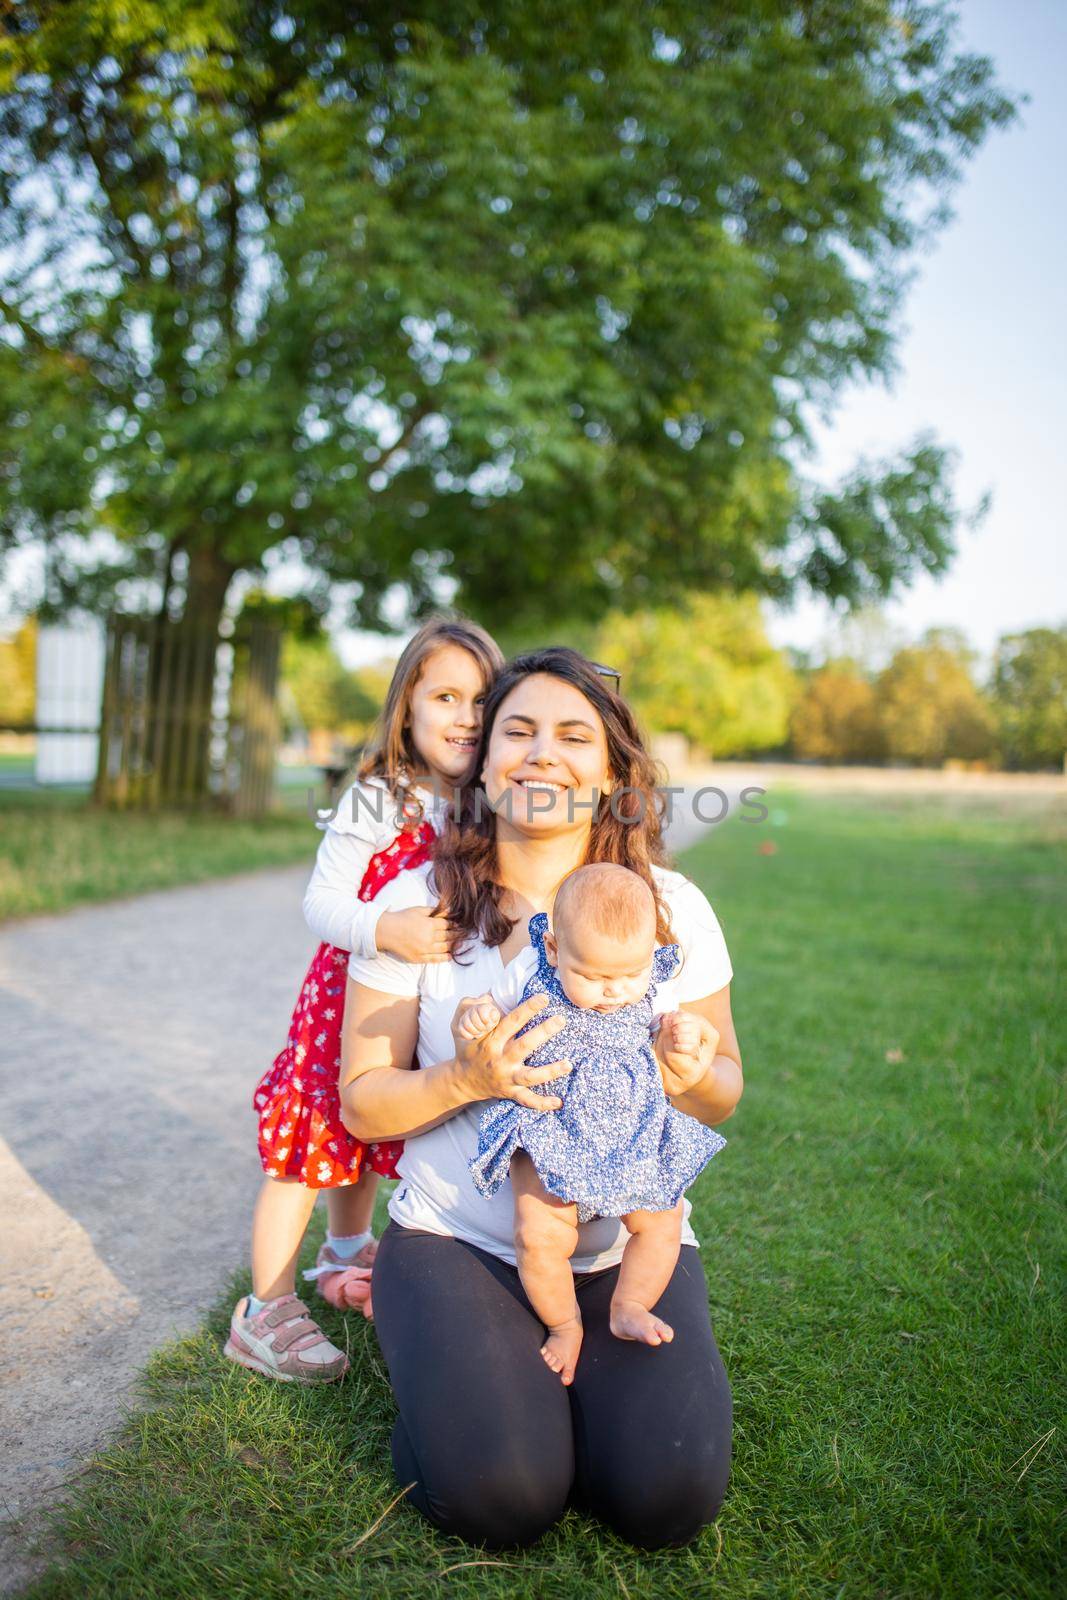 Happy woman, baby, and little girl sitting on grass next to a path and with trees as background. Smiling mother playing with adorable daughters in park. Young family having fun outdoors